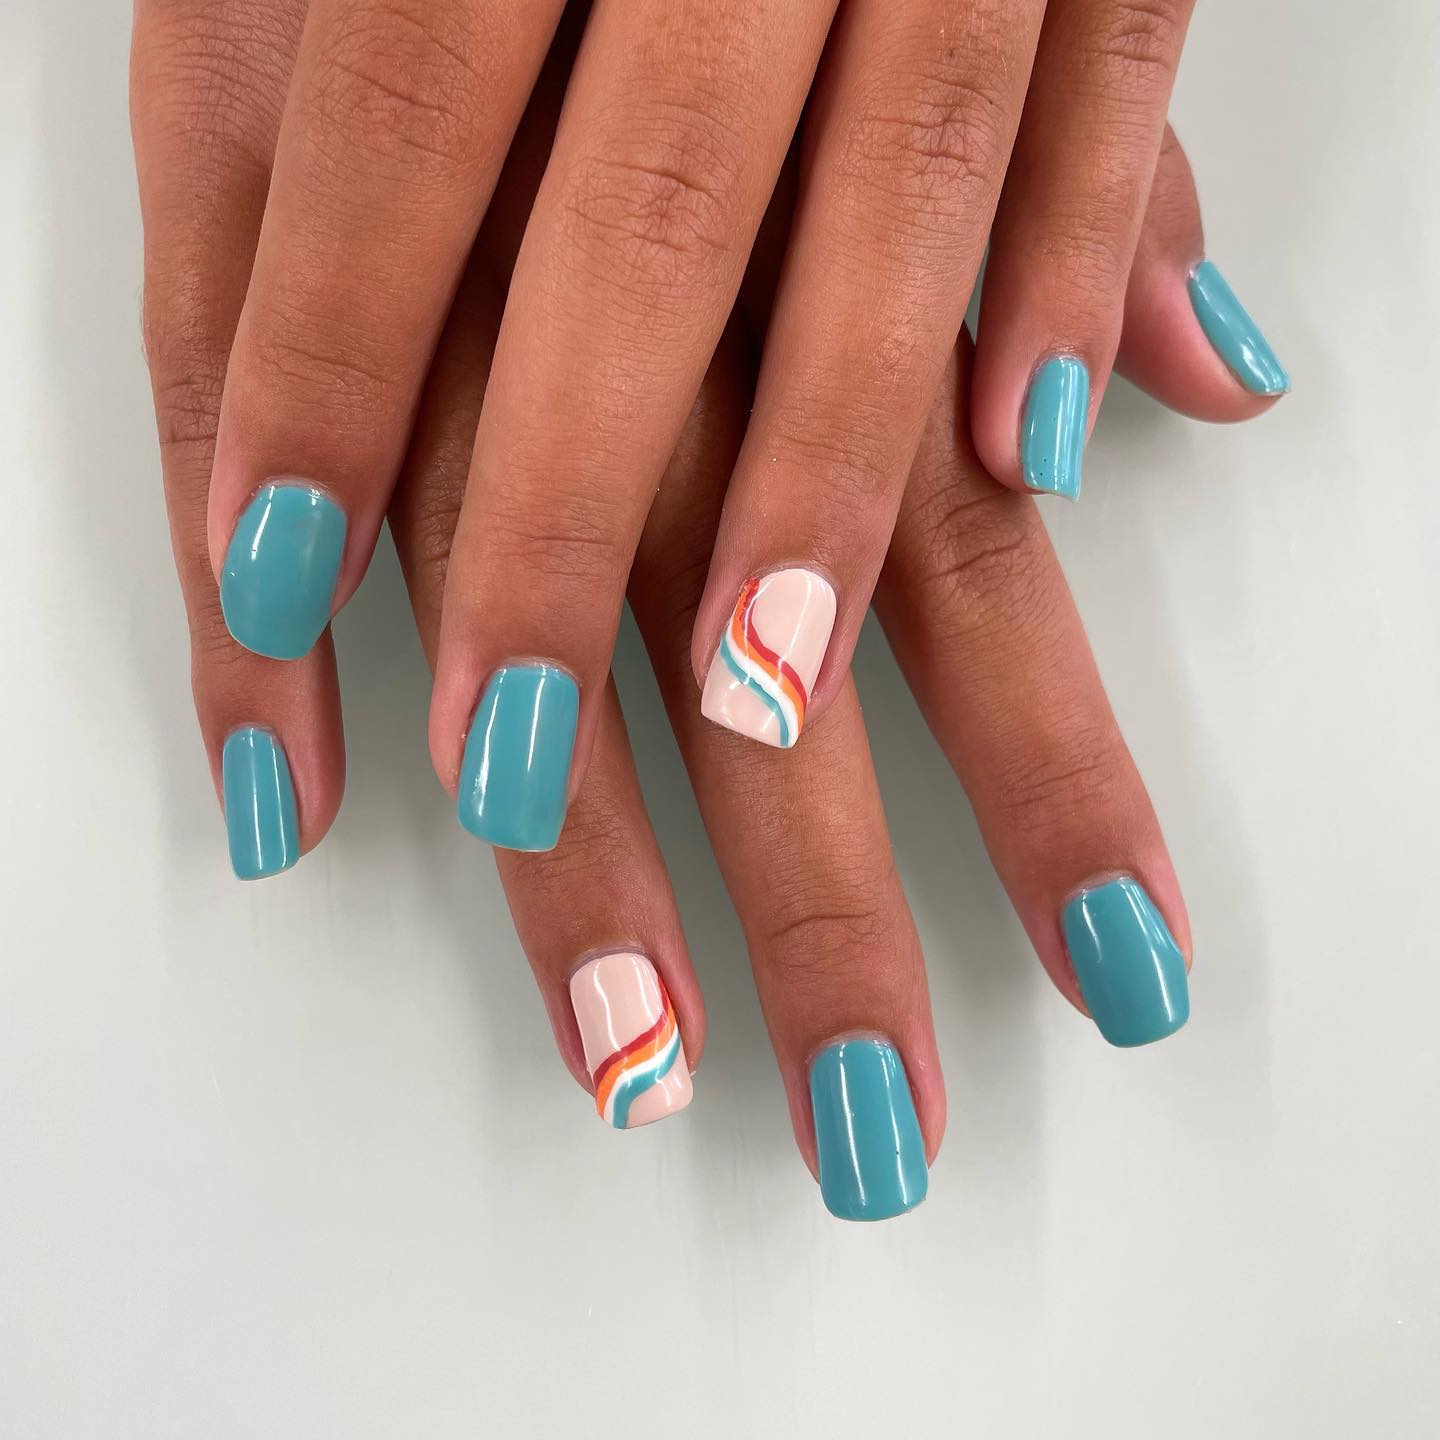  If you love blue but less shinier hue of it, this nail design is a great choice for you. For your accent nails, you can draw random swirls on top of a pastel pink base.